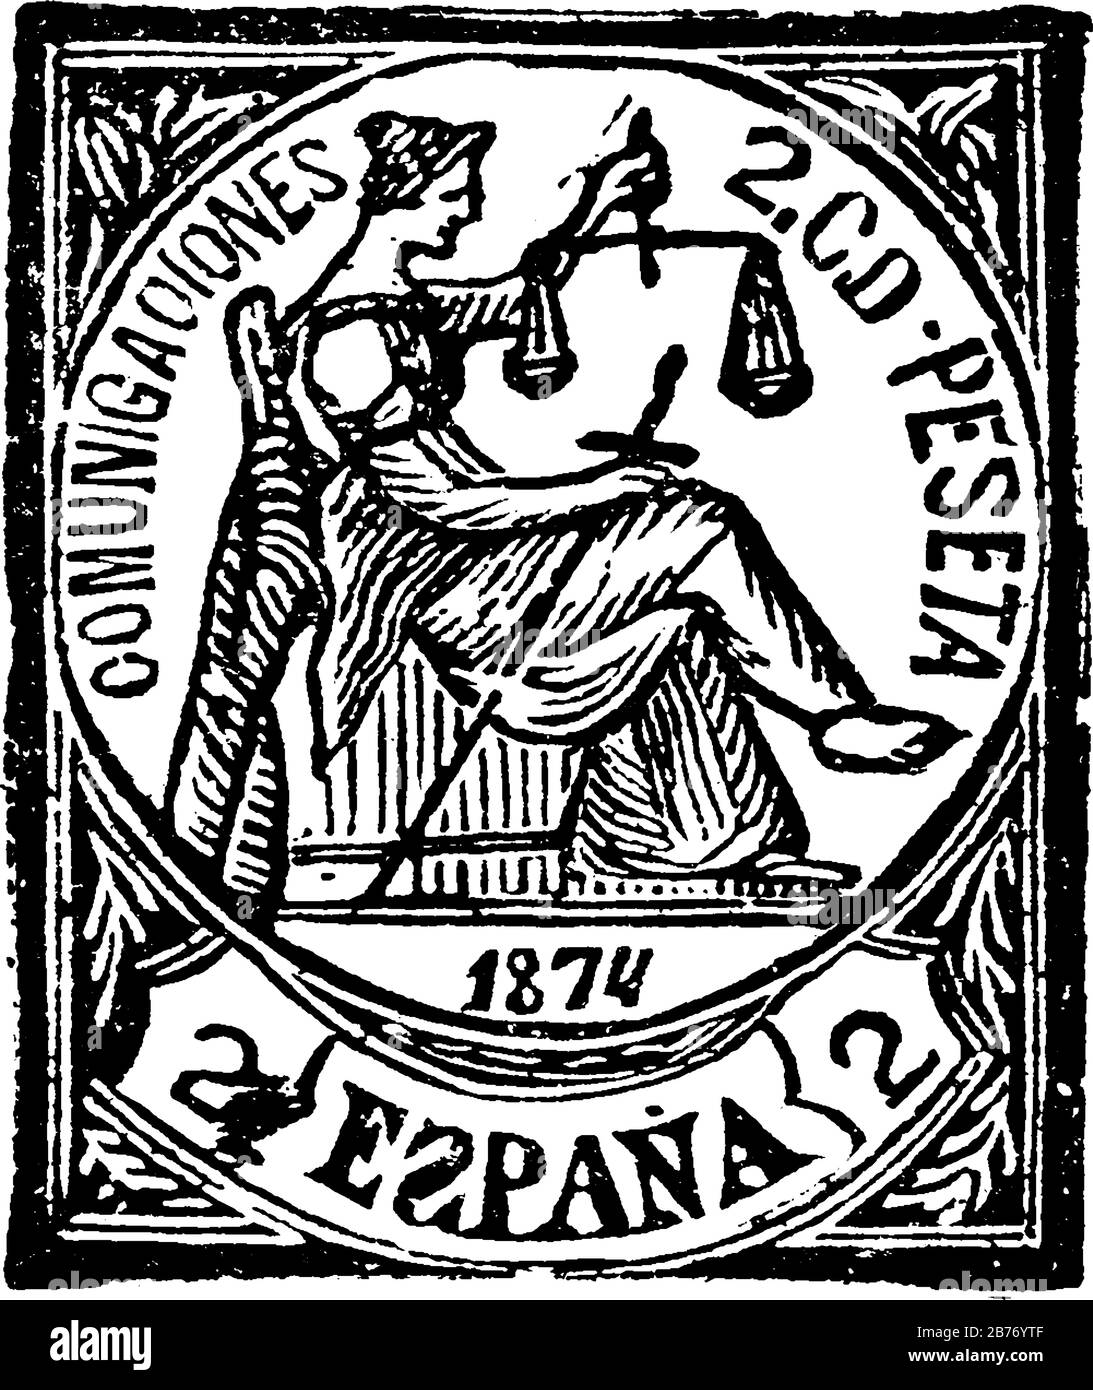 Spain Stamp (2 c de peseta) from 1874, a small adhesive piece of paper stuck to something to show an amount of money paid, mainly a postage stamp, vin Stock Vector